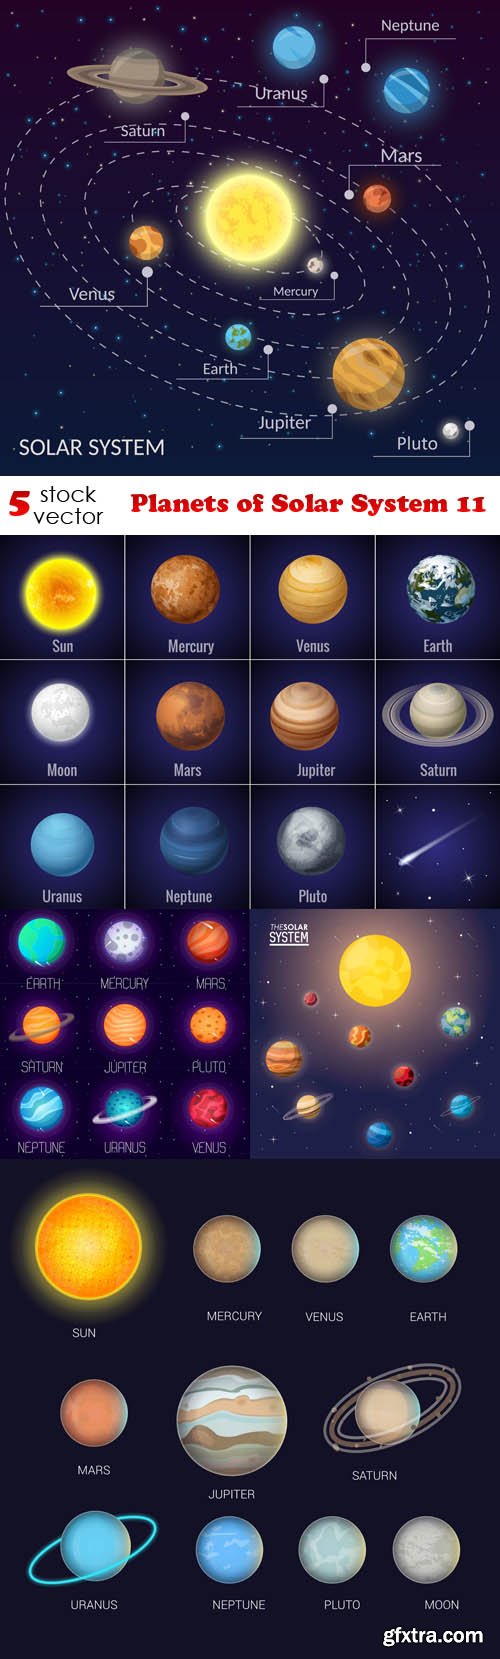 Vectors - Planets of Solar System 11